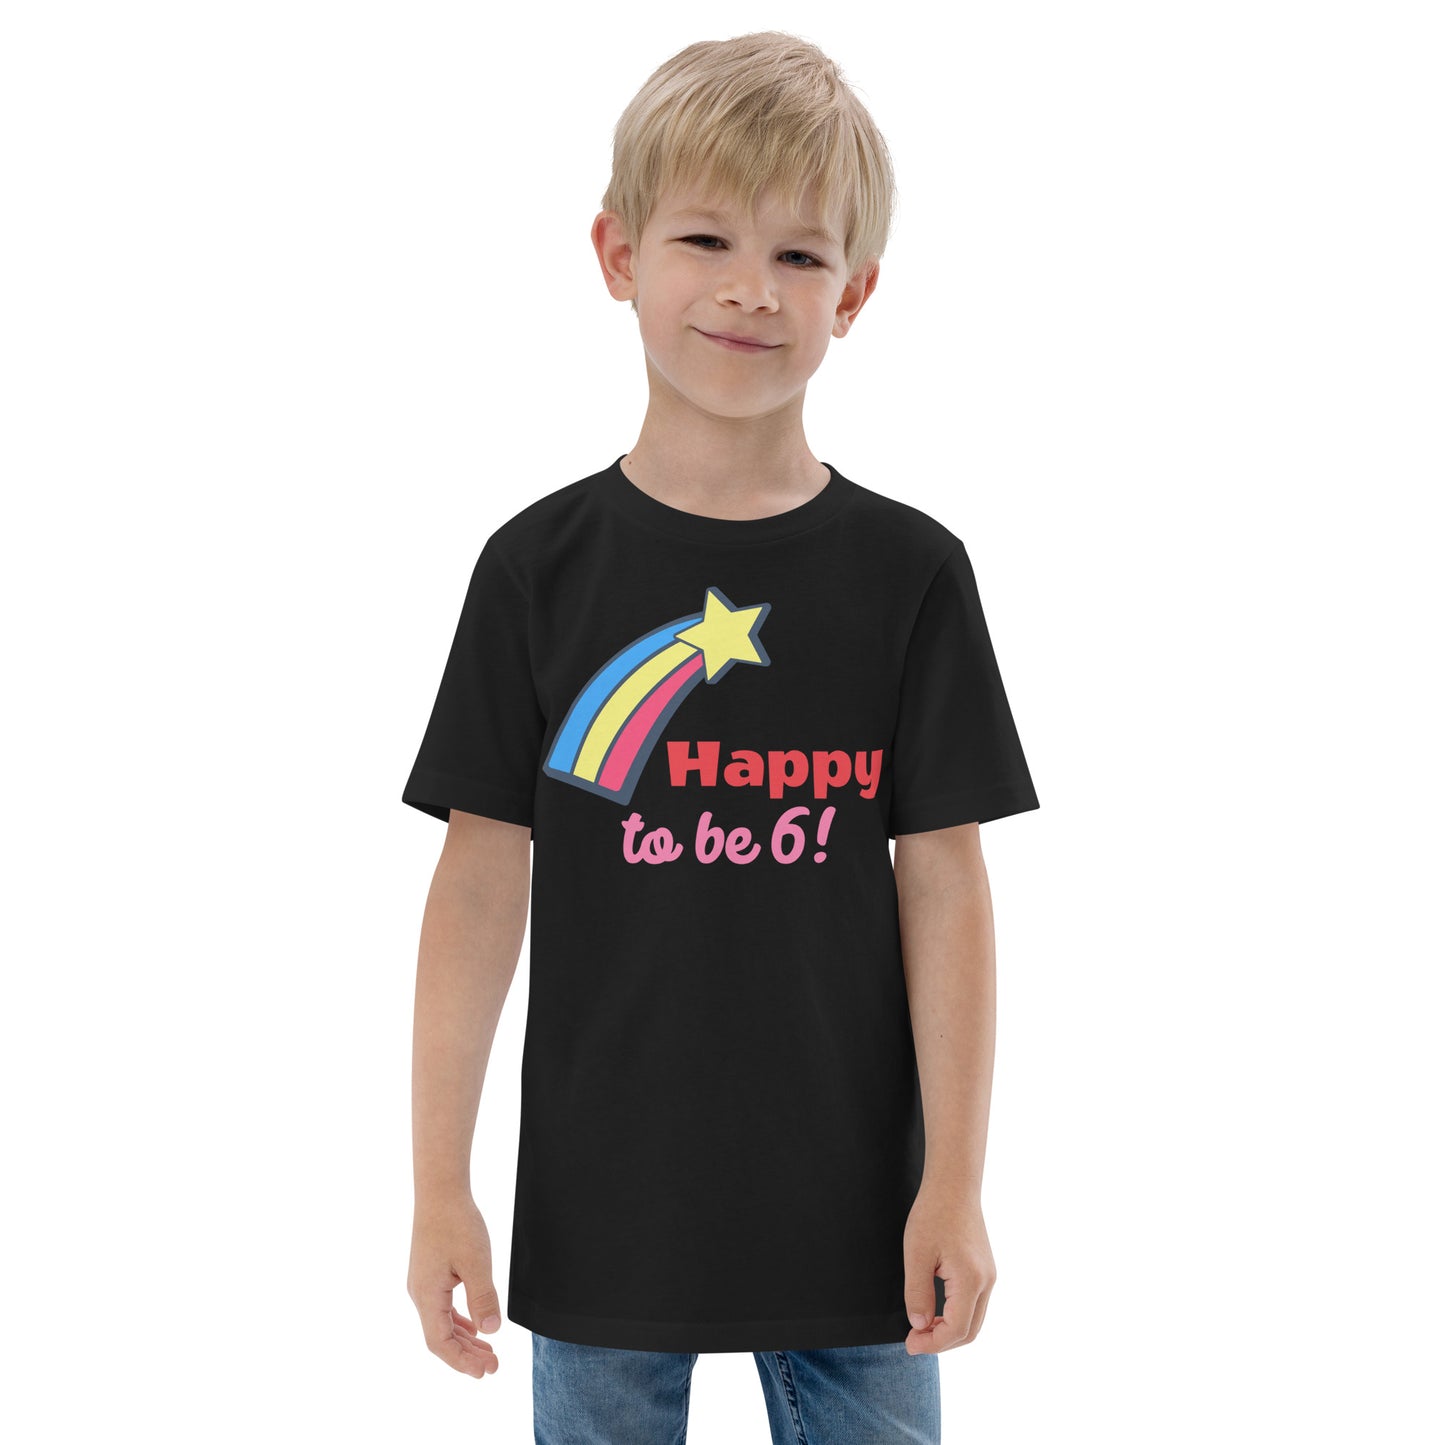 Kids Personalized Graphic Customized T-shirt Happy To Be 3-13 Years!